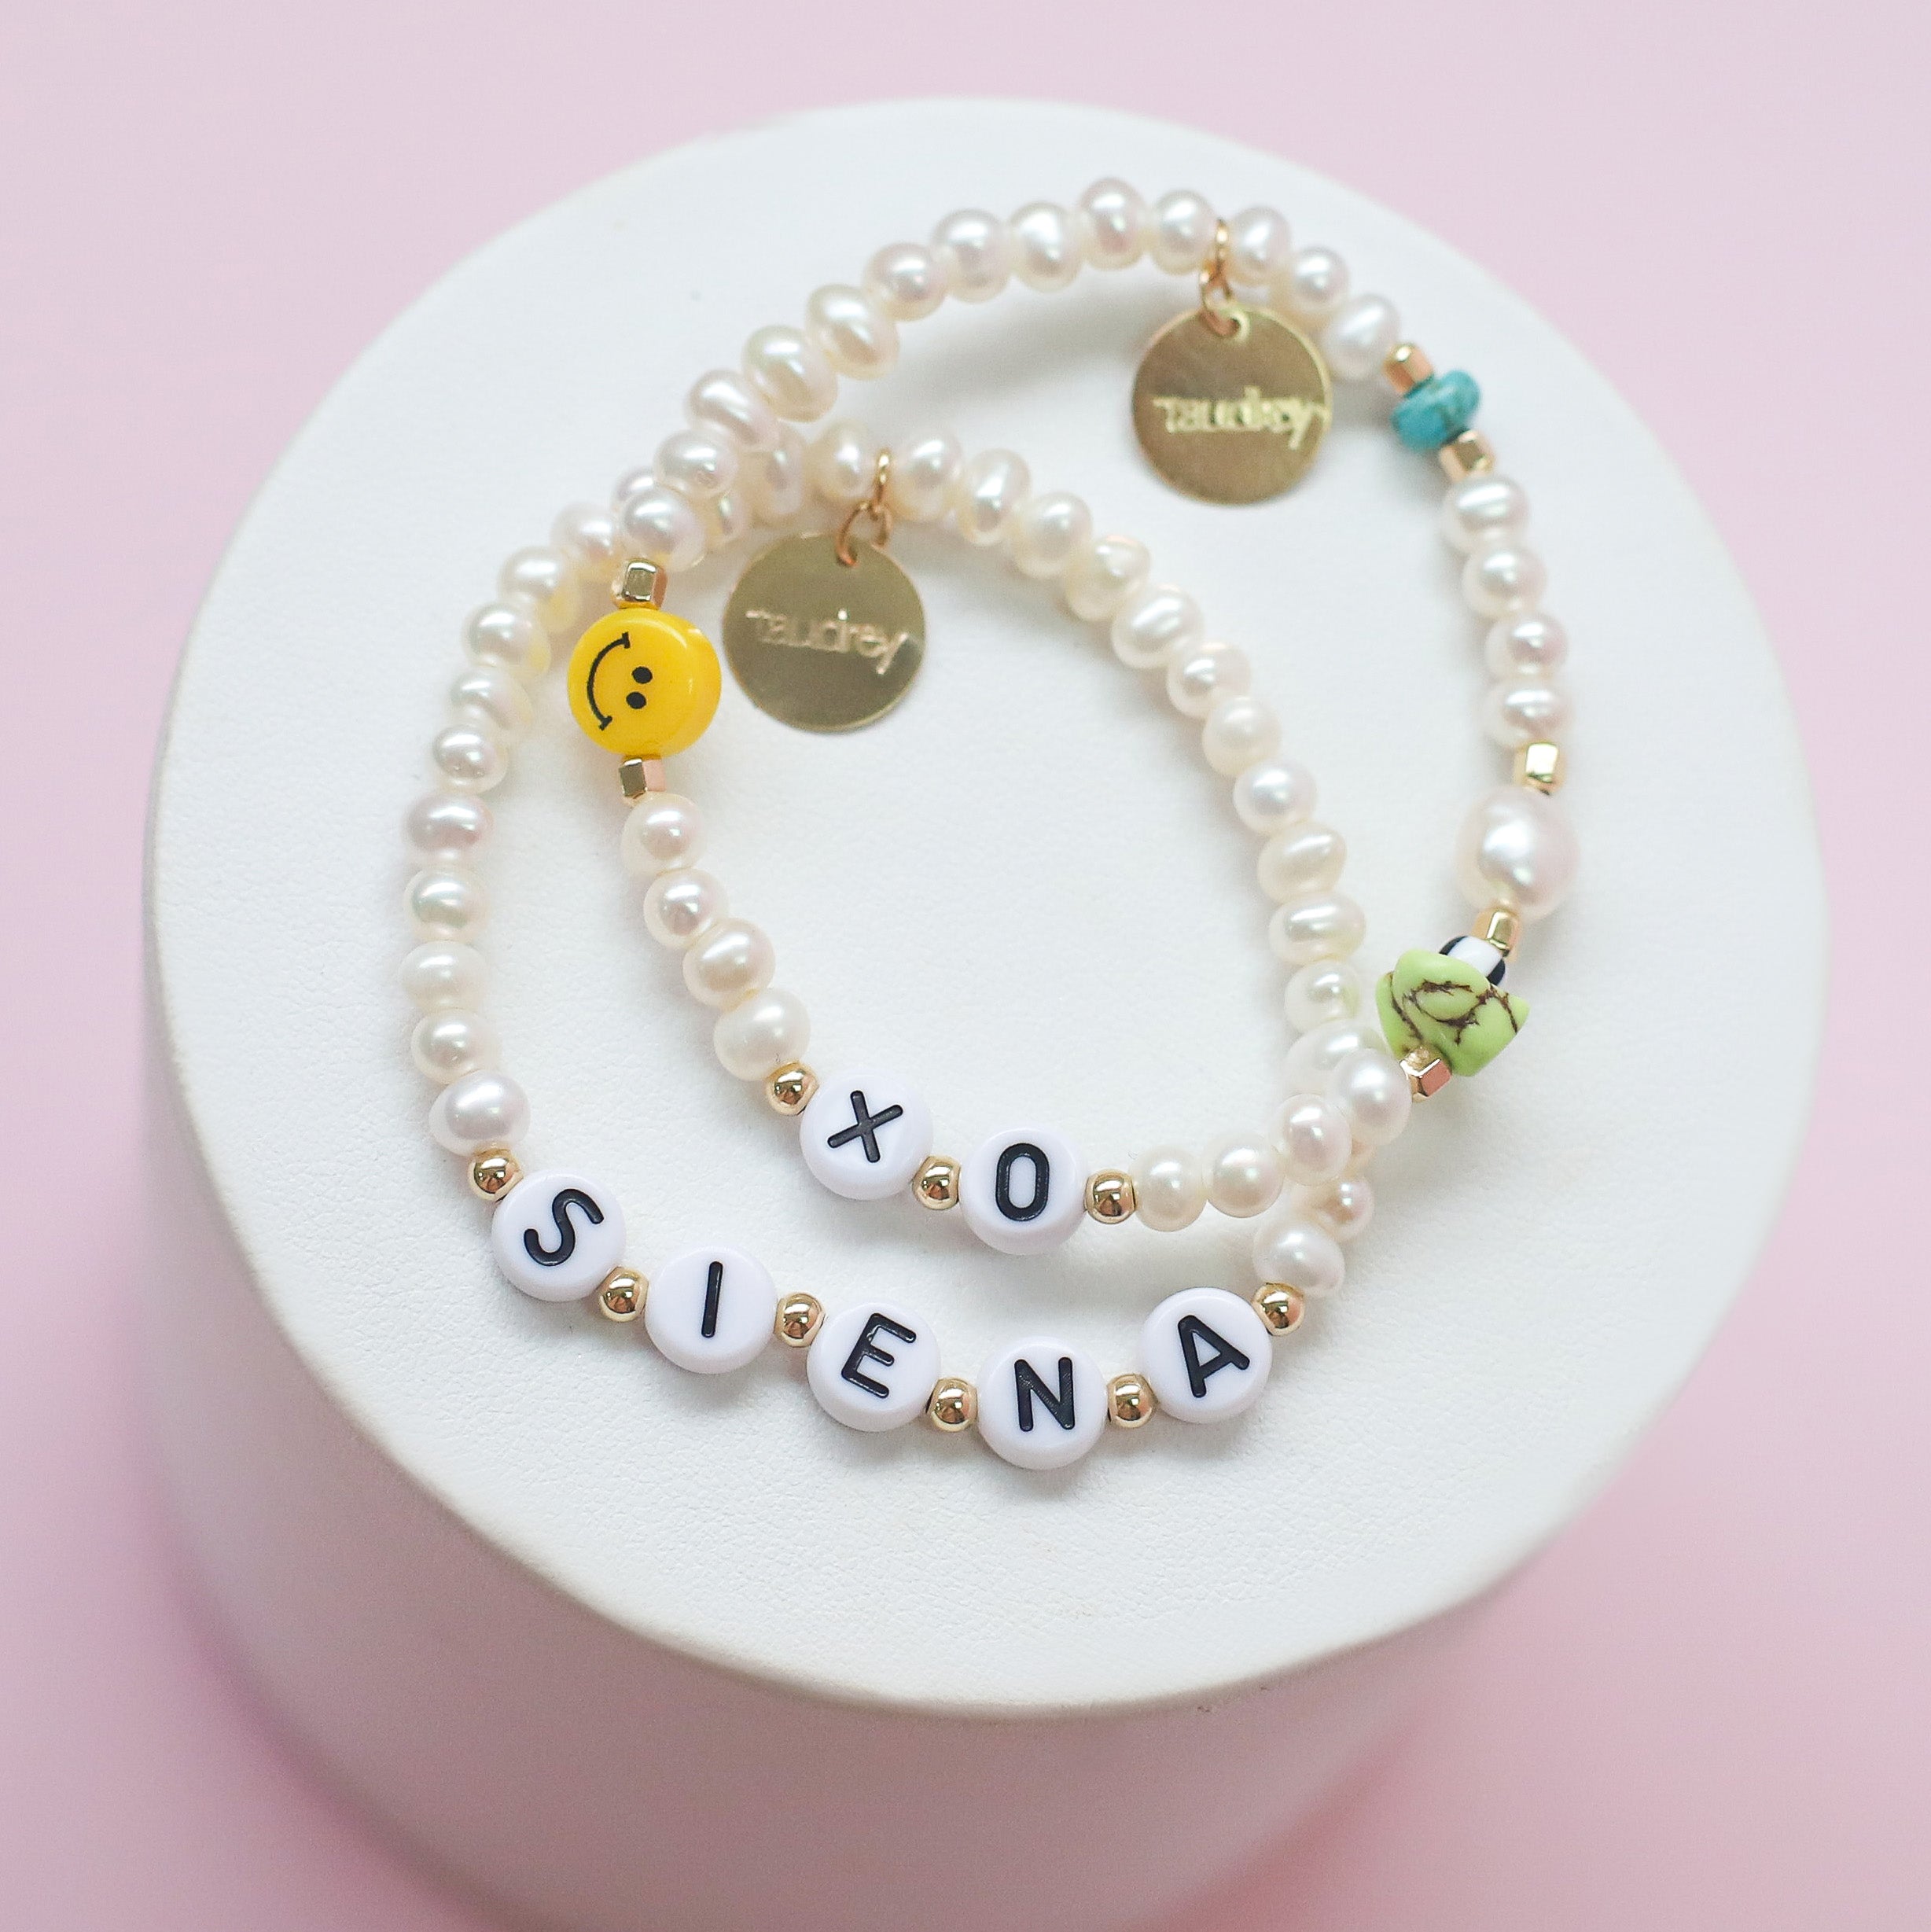 Hugs and Kisses  Bracelet (Also Available for Kids)